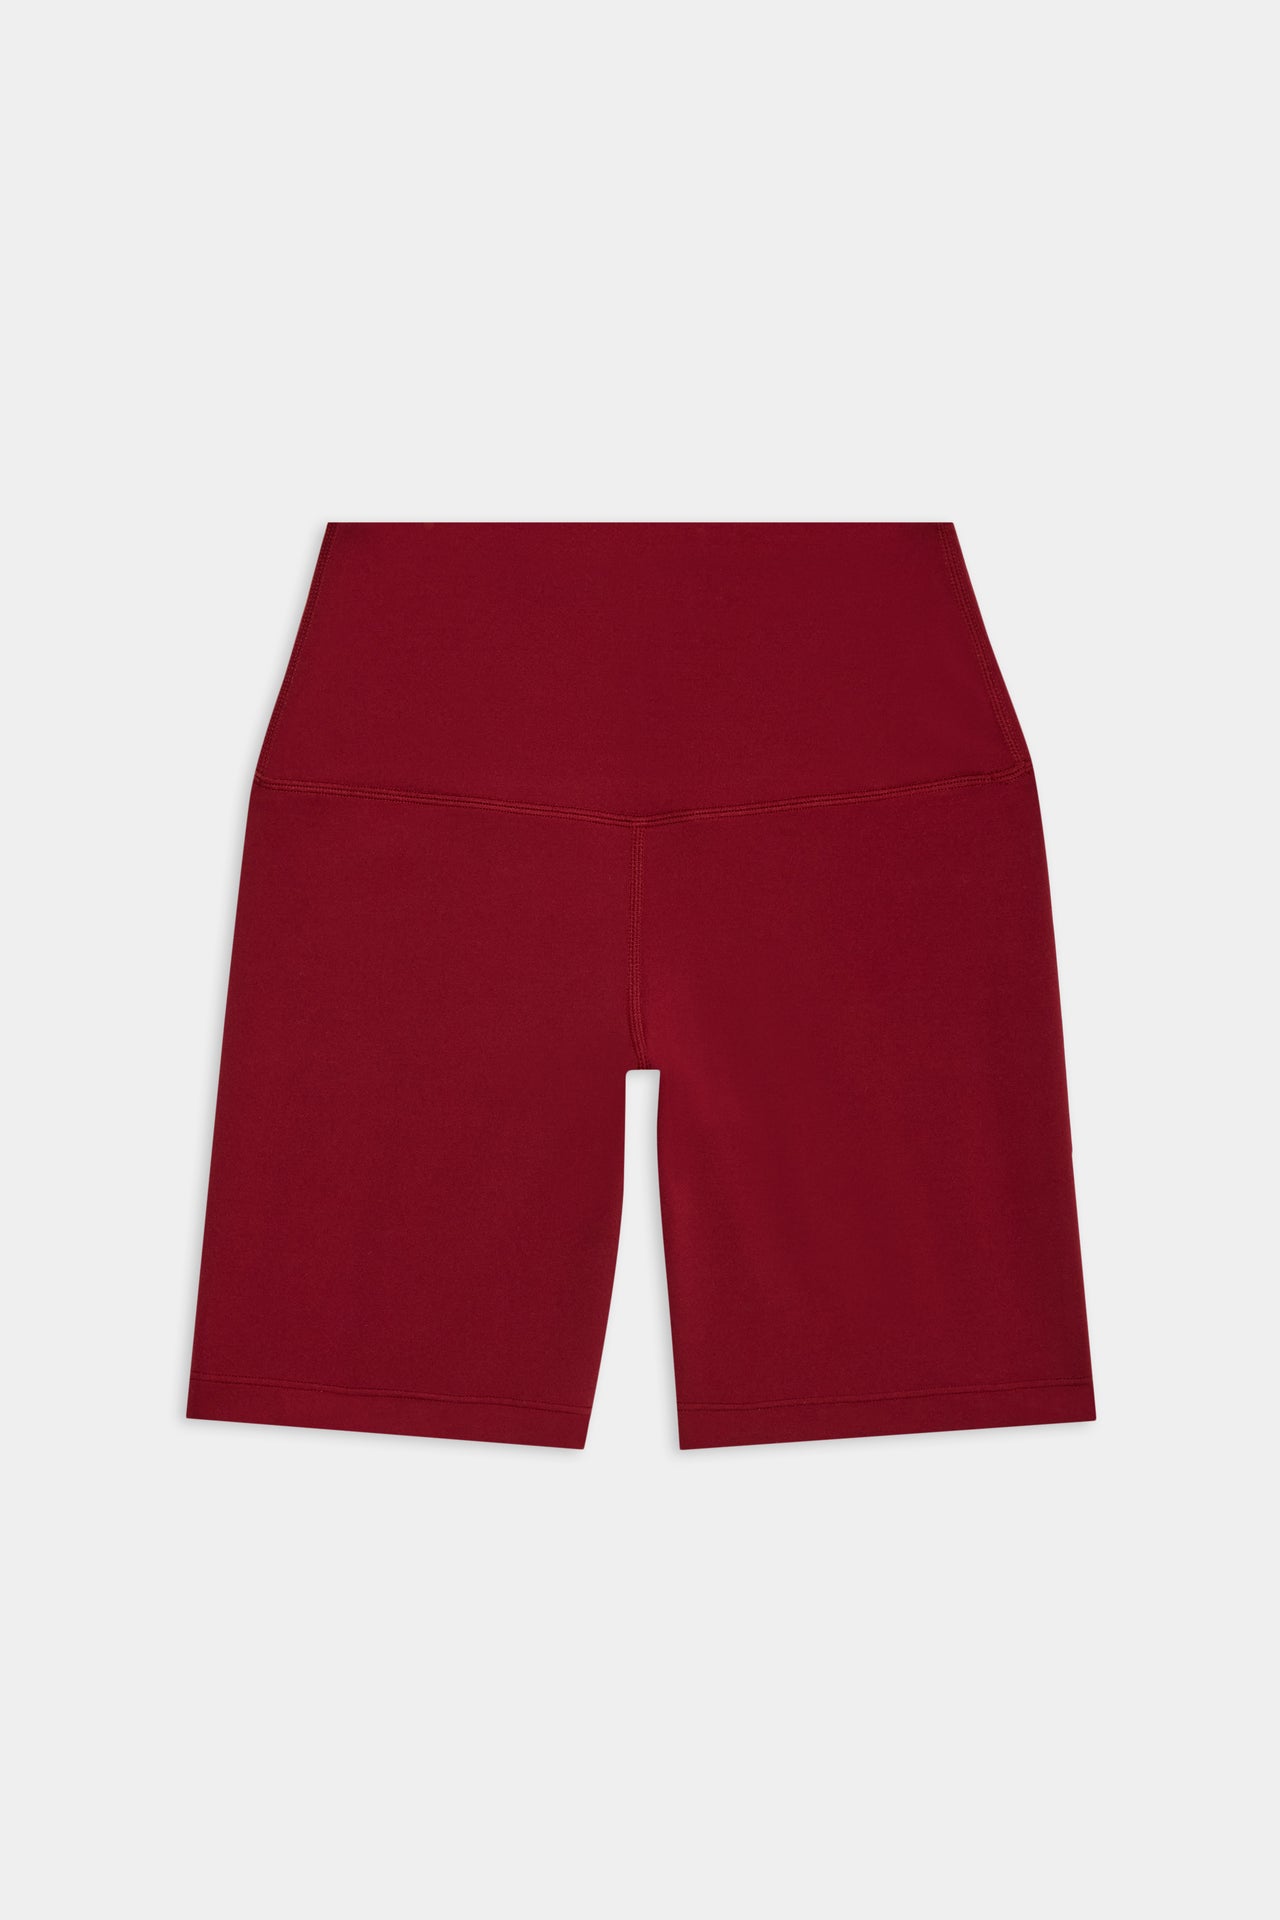 Flat view of deep red mid thigh bike shorts